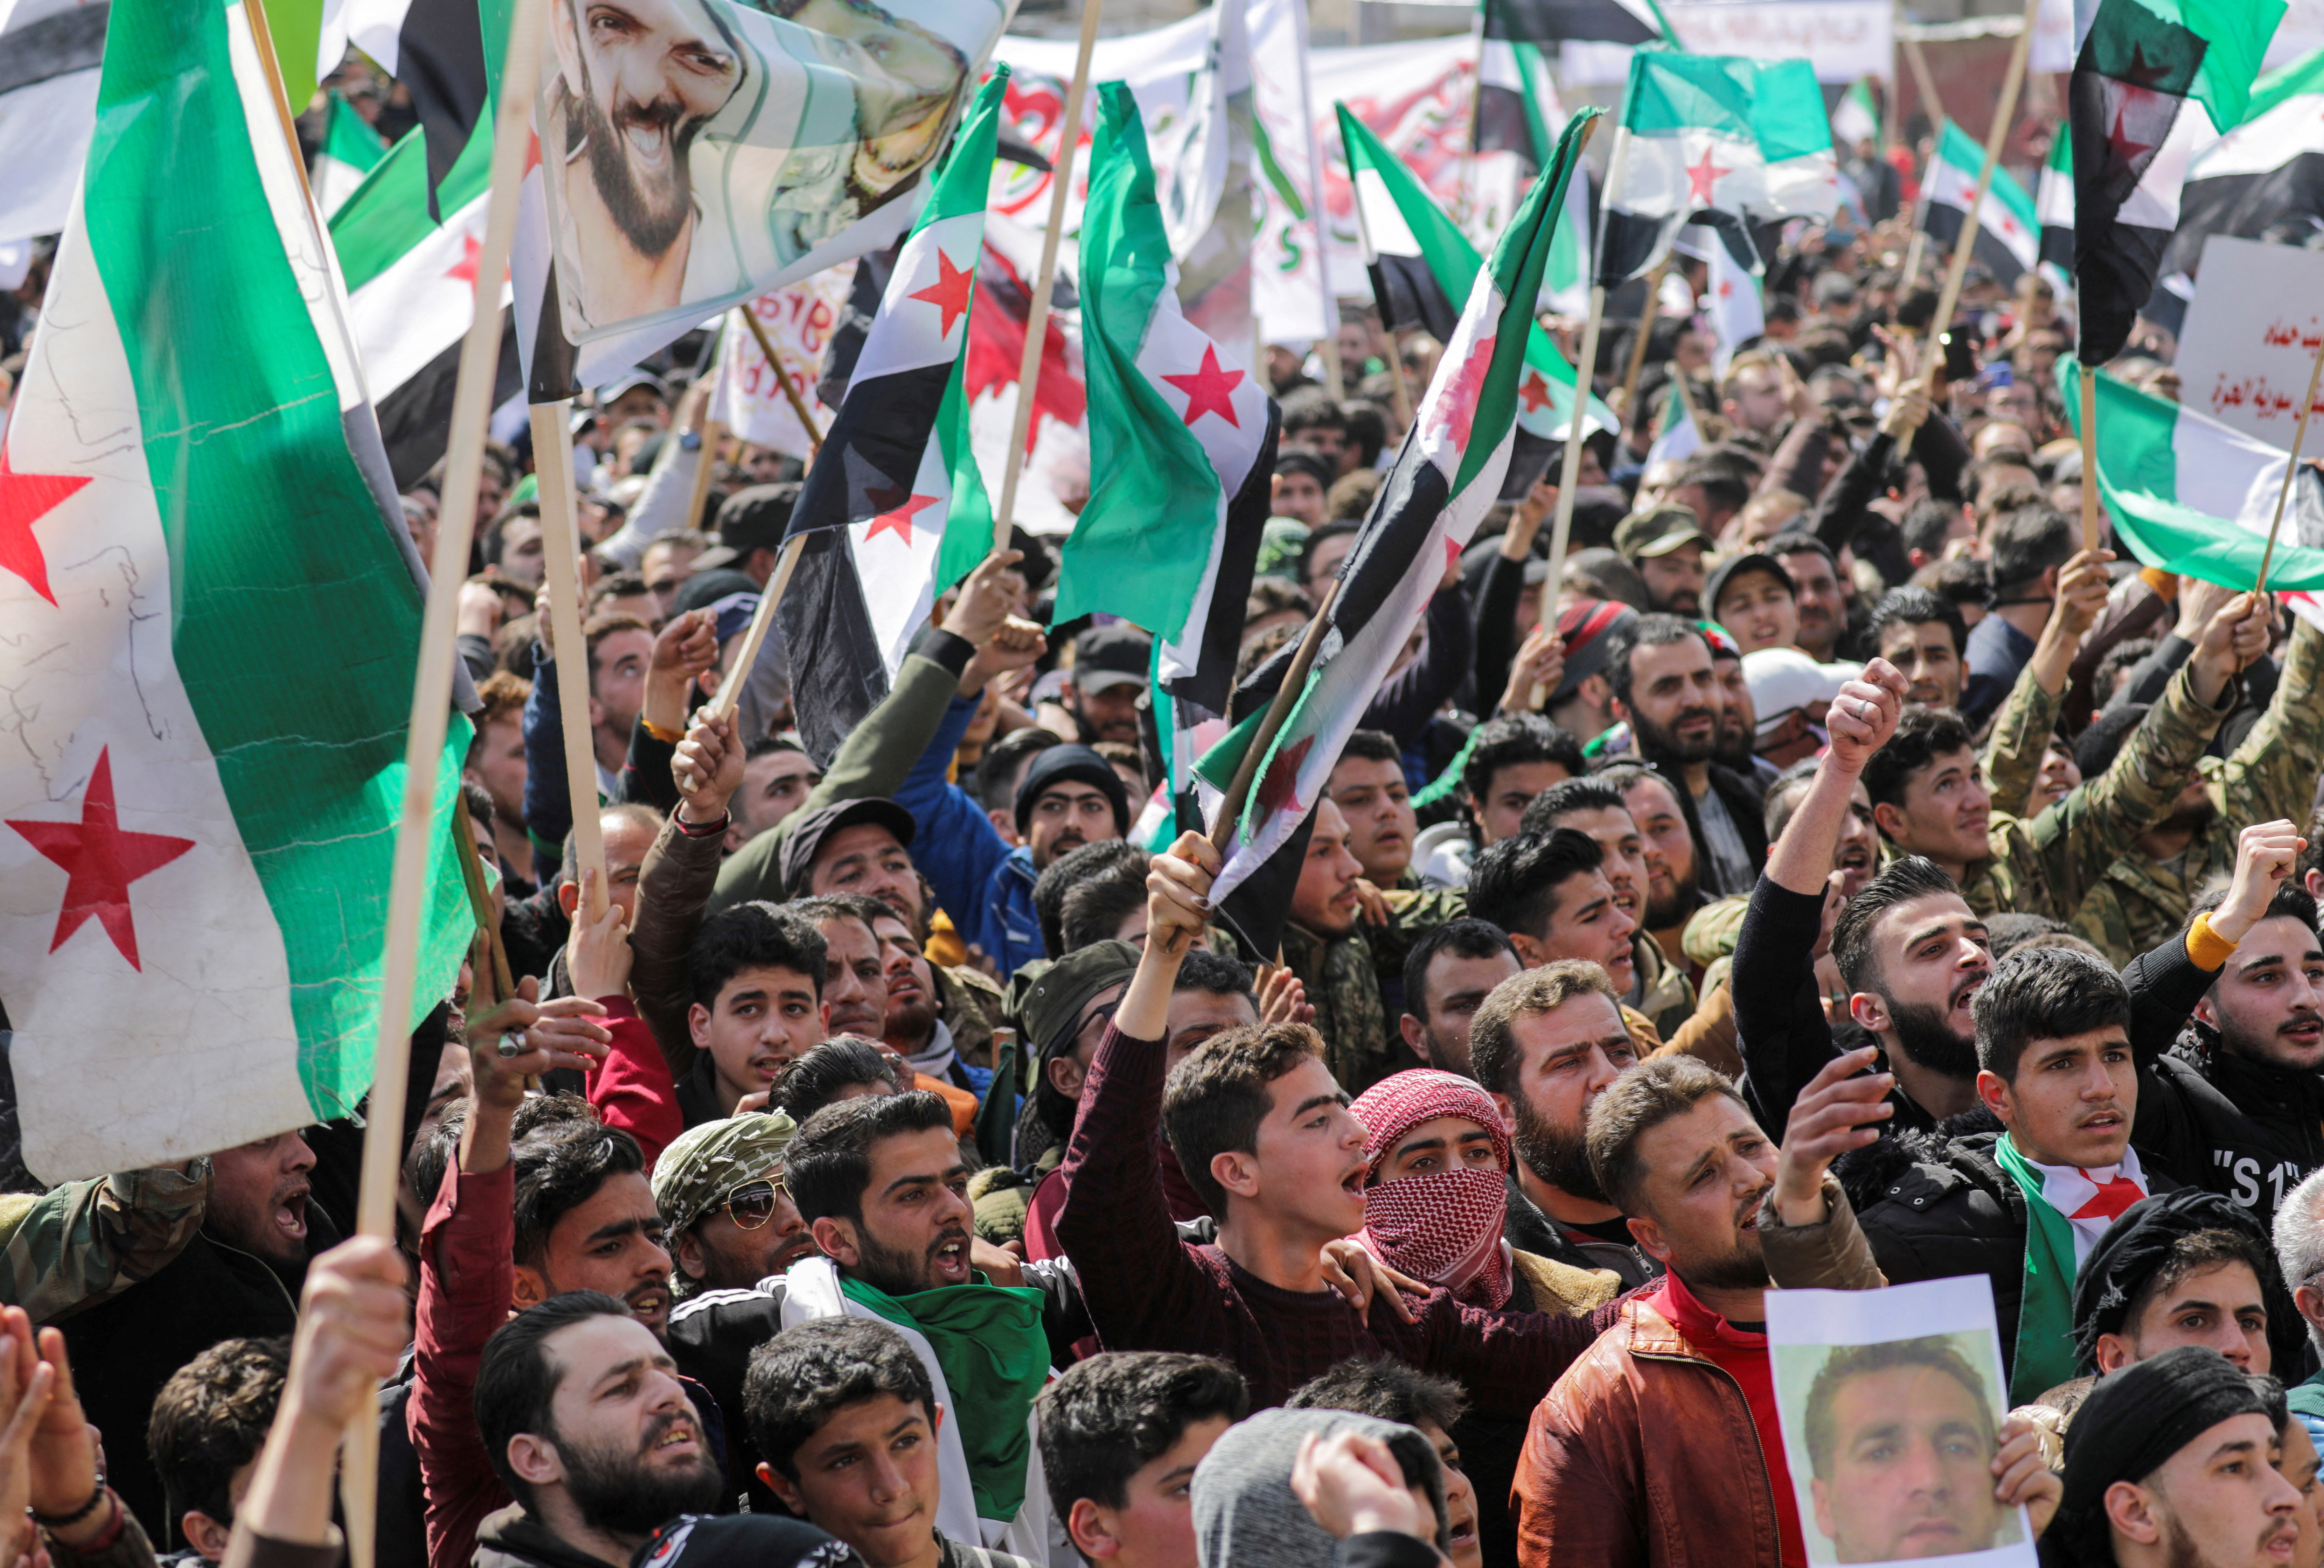 People carry banners and opposition flags during a demonstration in Idlib